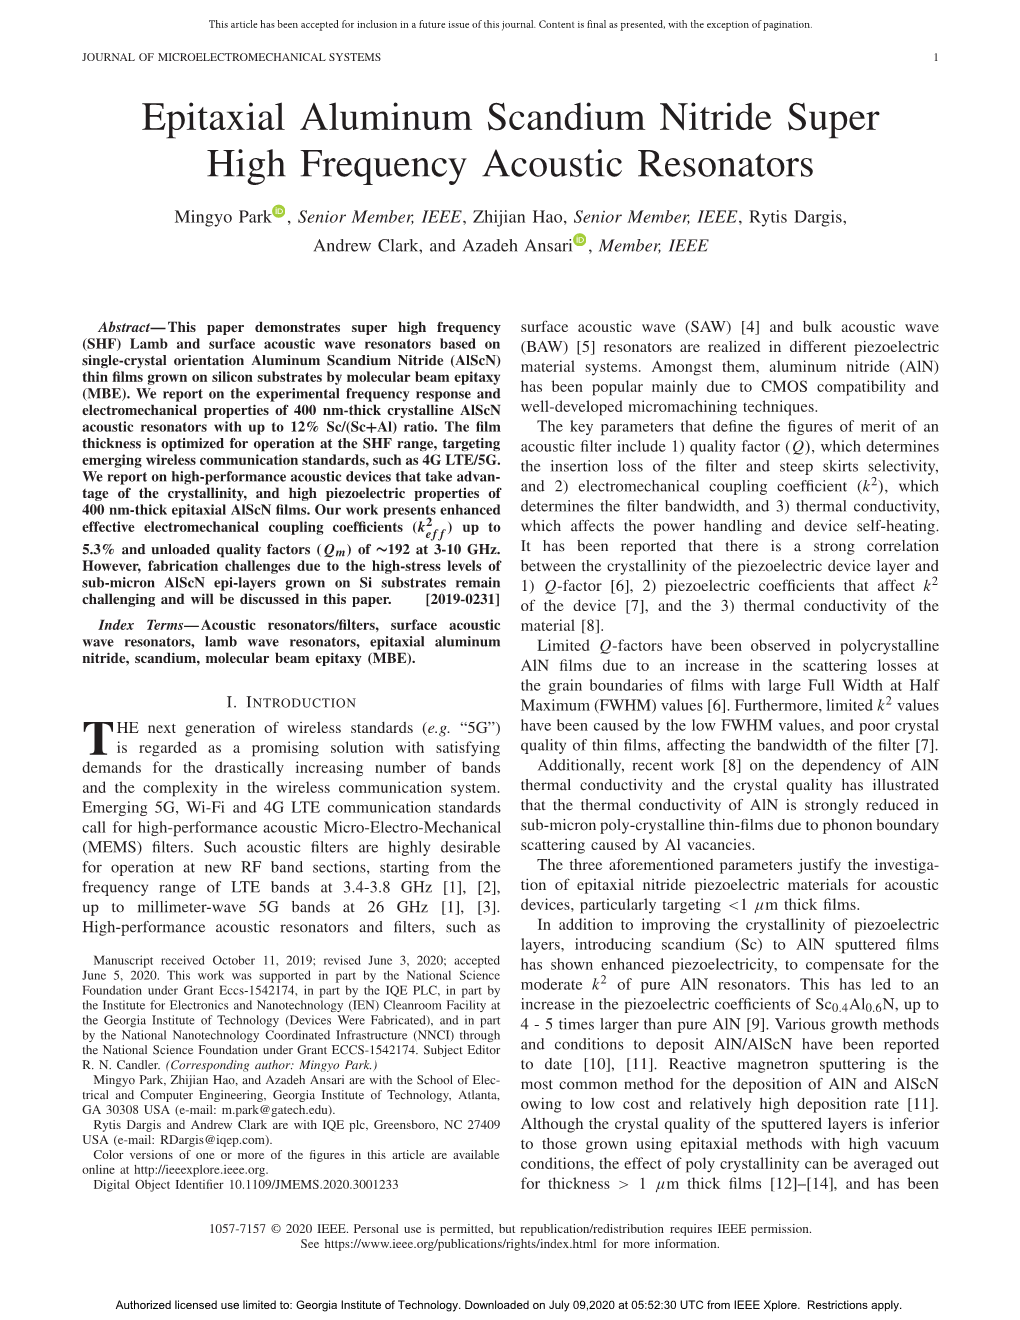 Epitaxial Aluminum Scandium Nitride Super High Frequency Acoustic Resonators